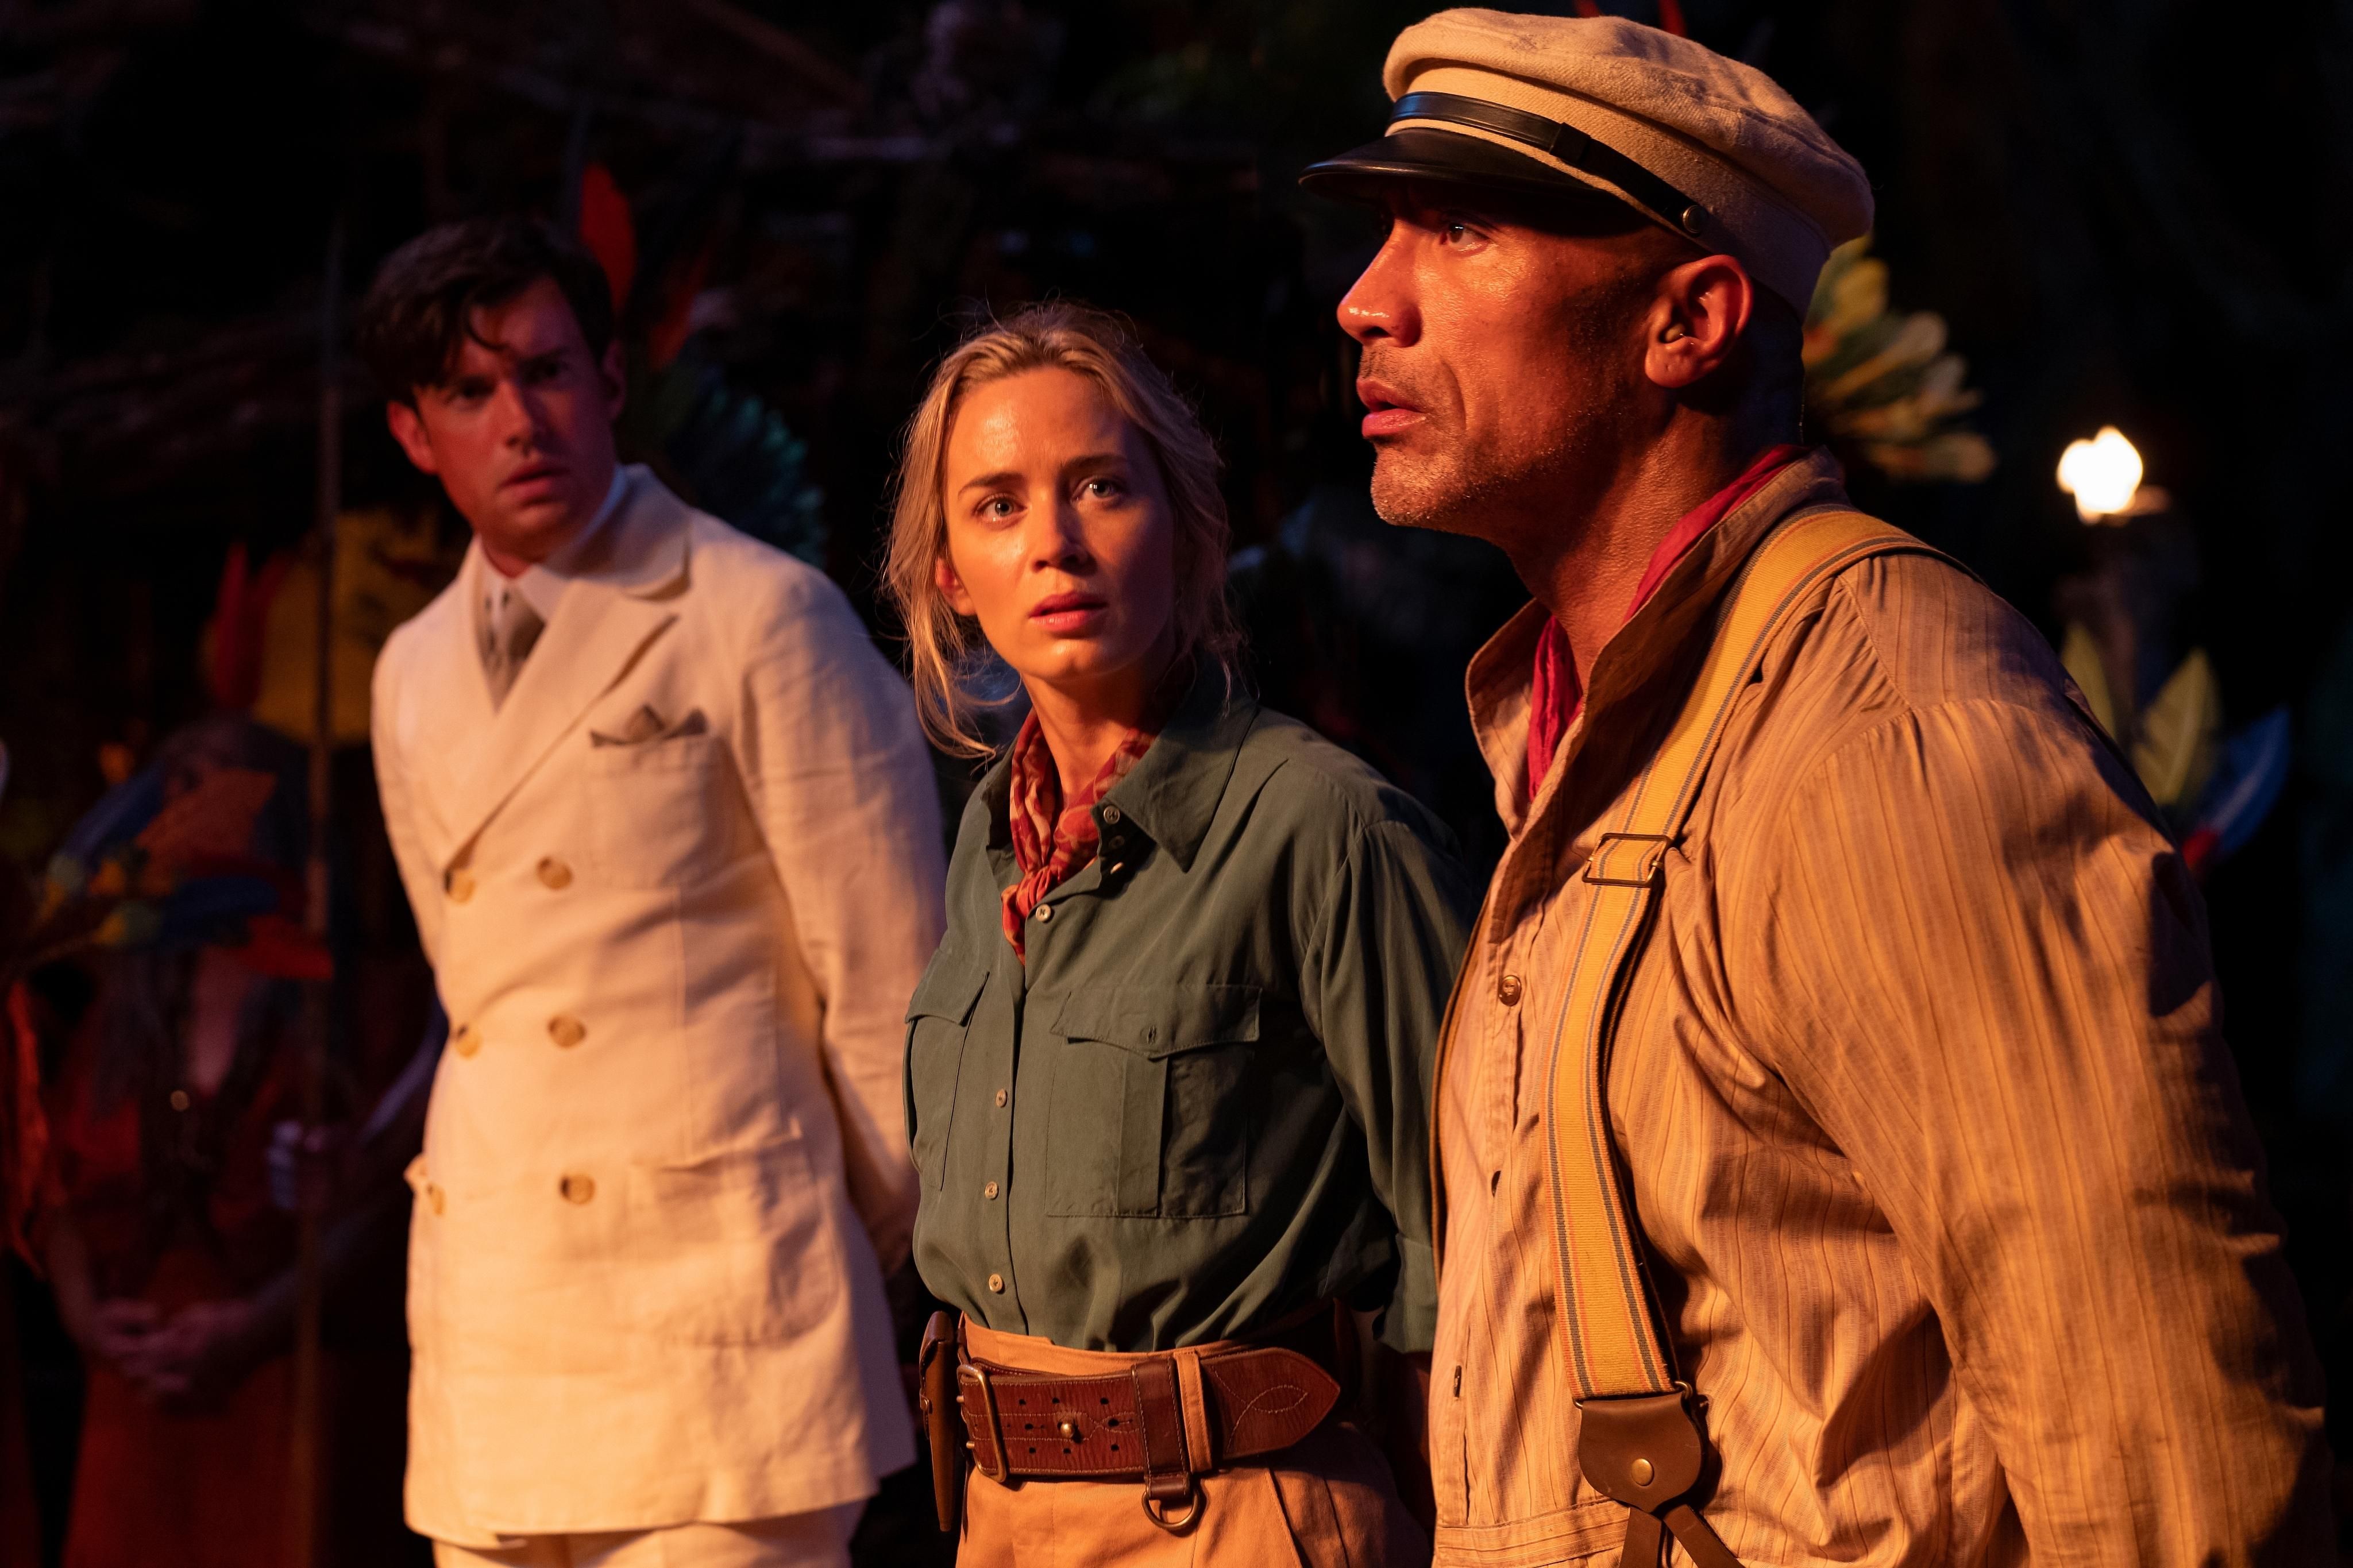 From Left to Right: Macgregor (played by Jack Whitehall), Lily (played by Emily Blunt) and Frank (played by Dwayne Johnson) are standing side by side in a movie still from Disney's "Jungle Cruise."